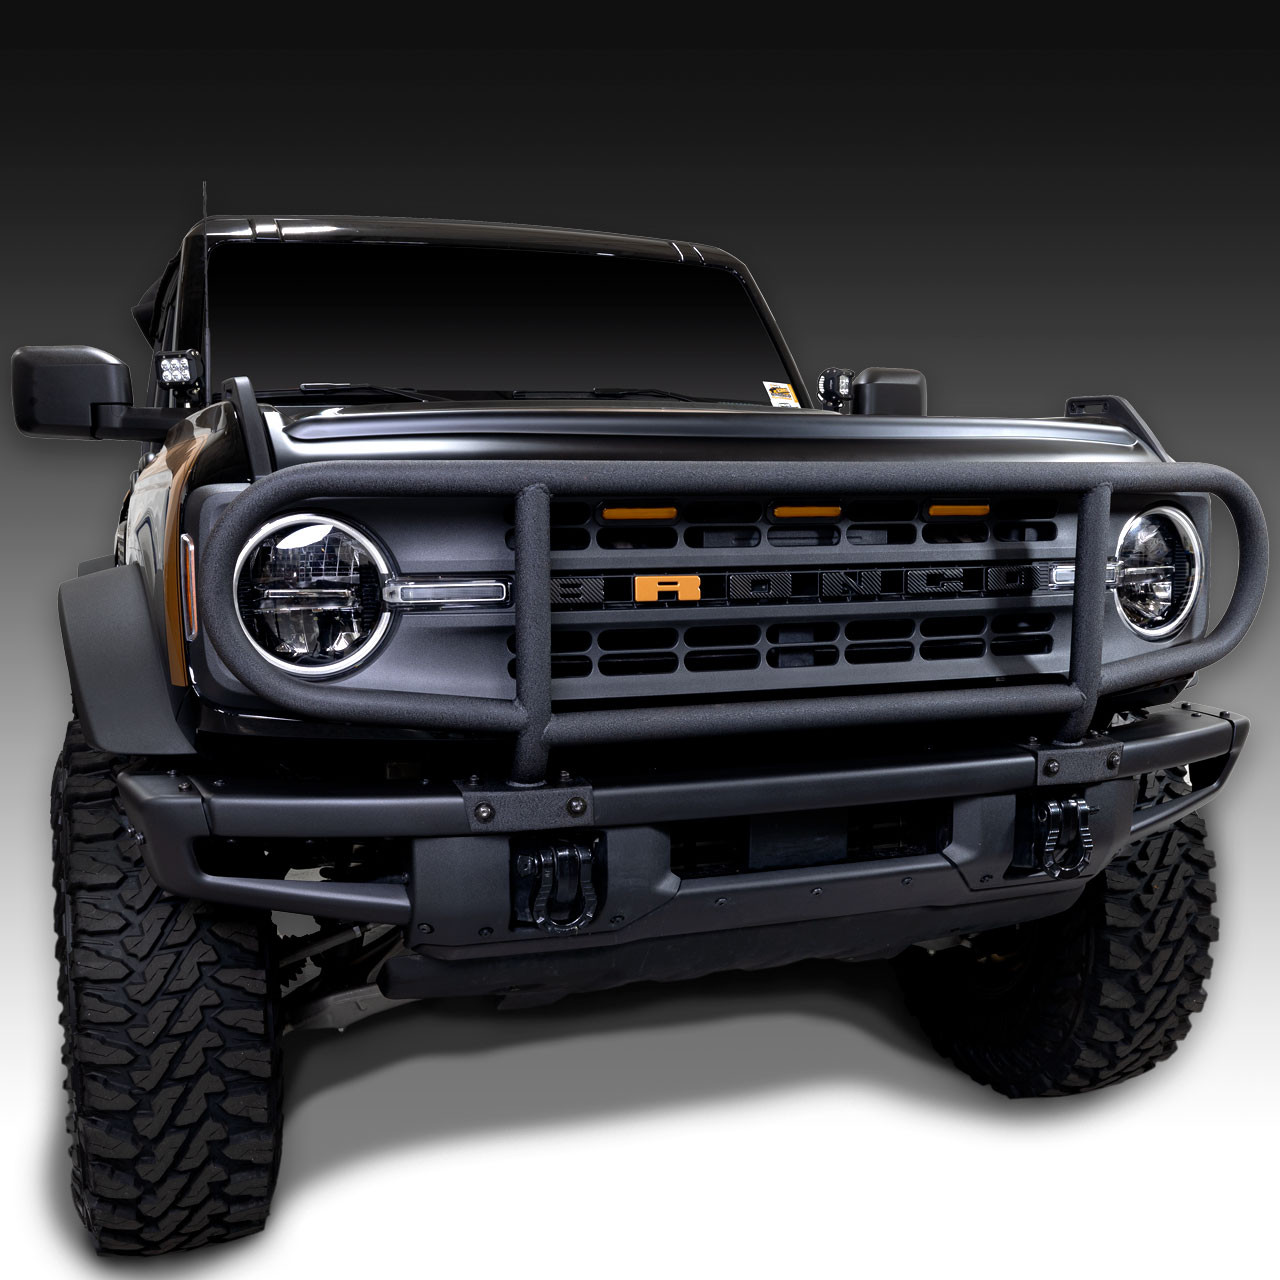 Ford Bronco Last Chance to Save - IAG Performance Black Friday Sale 1669667233745